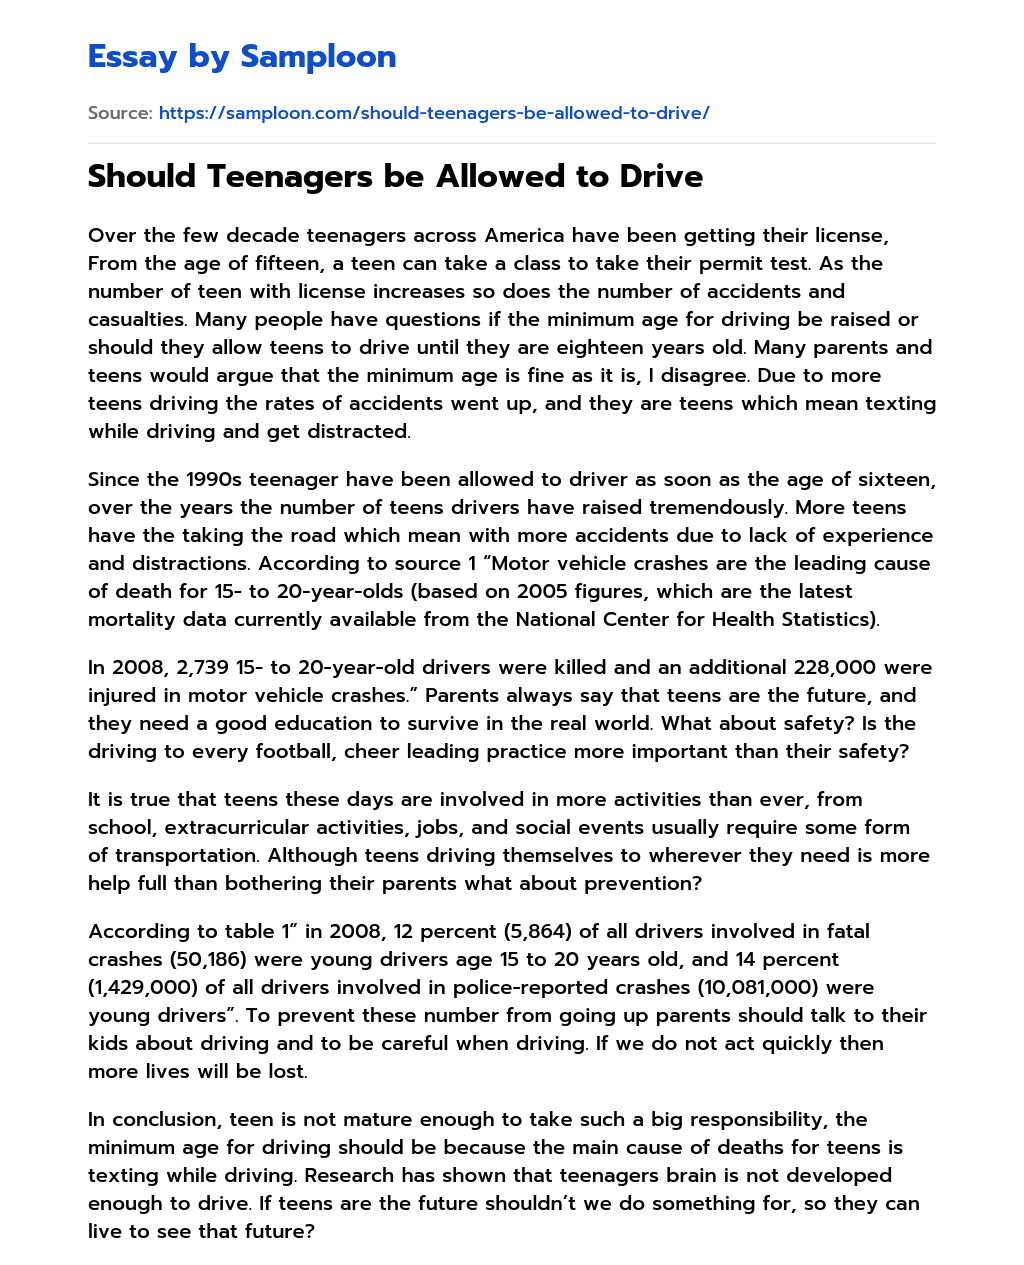 Should Teenagers be Allowed to Drive essay